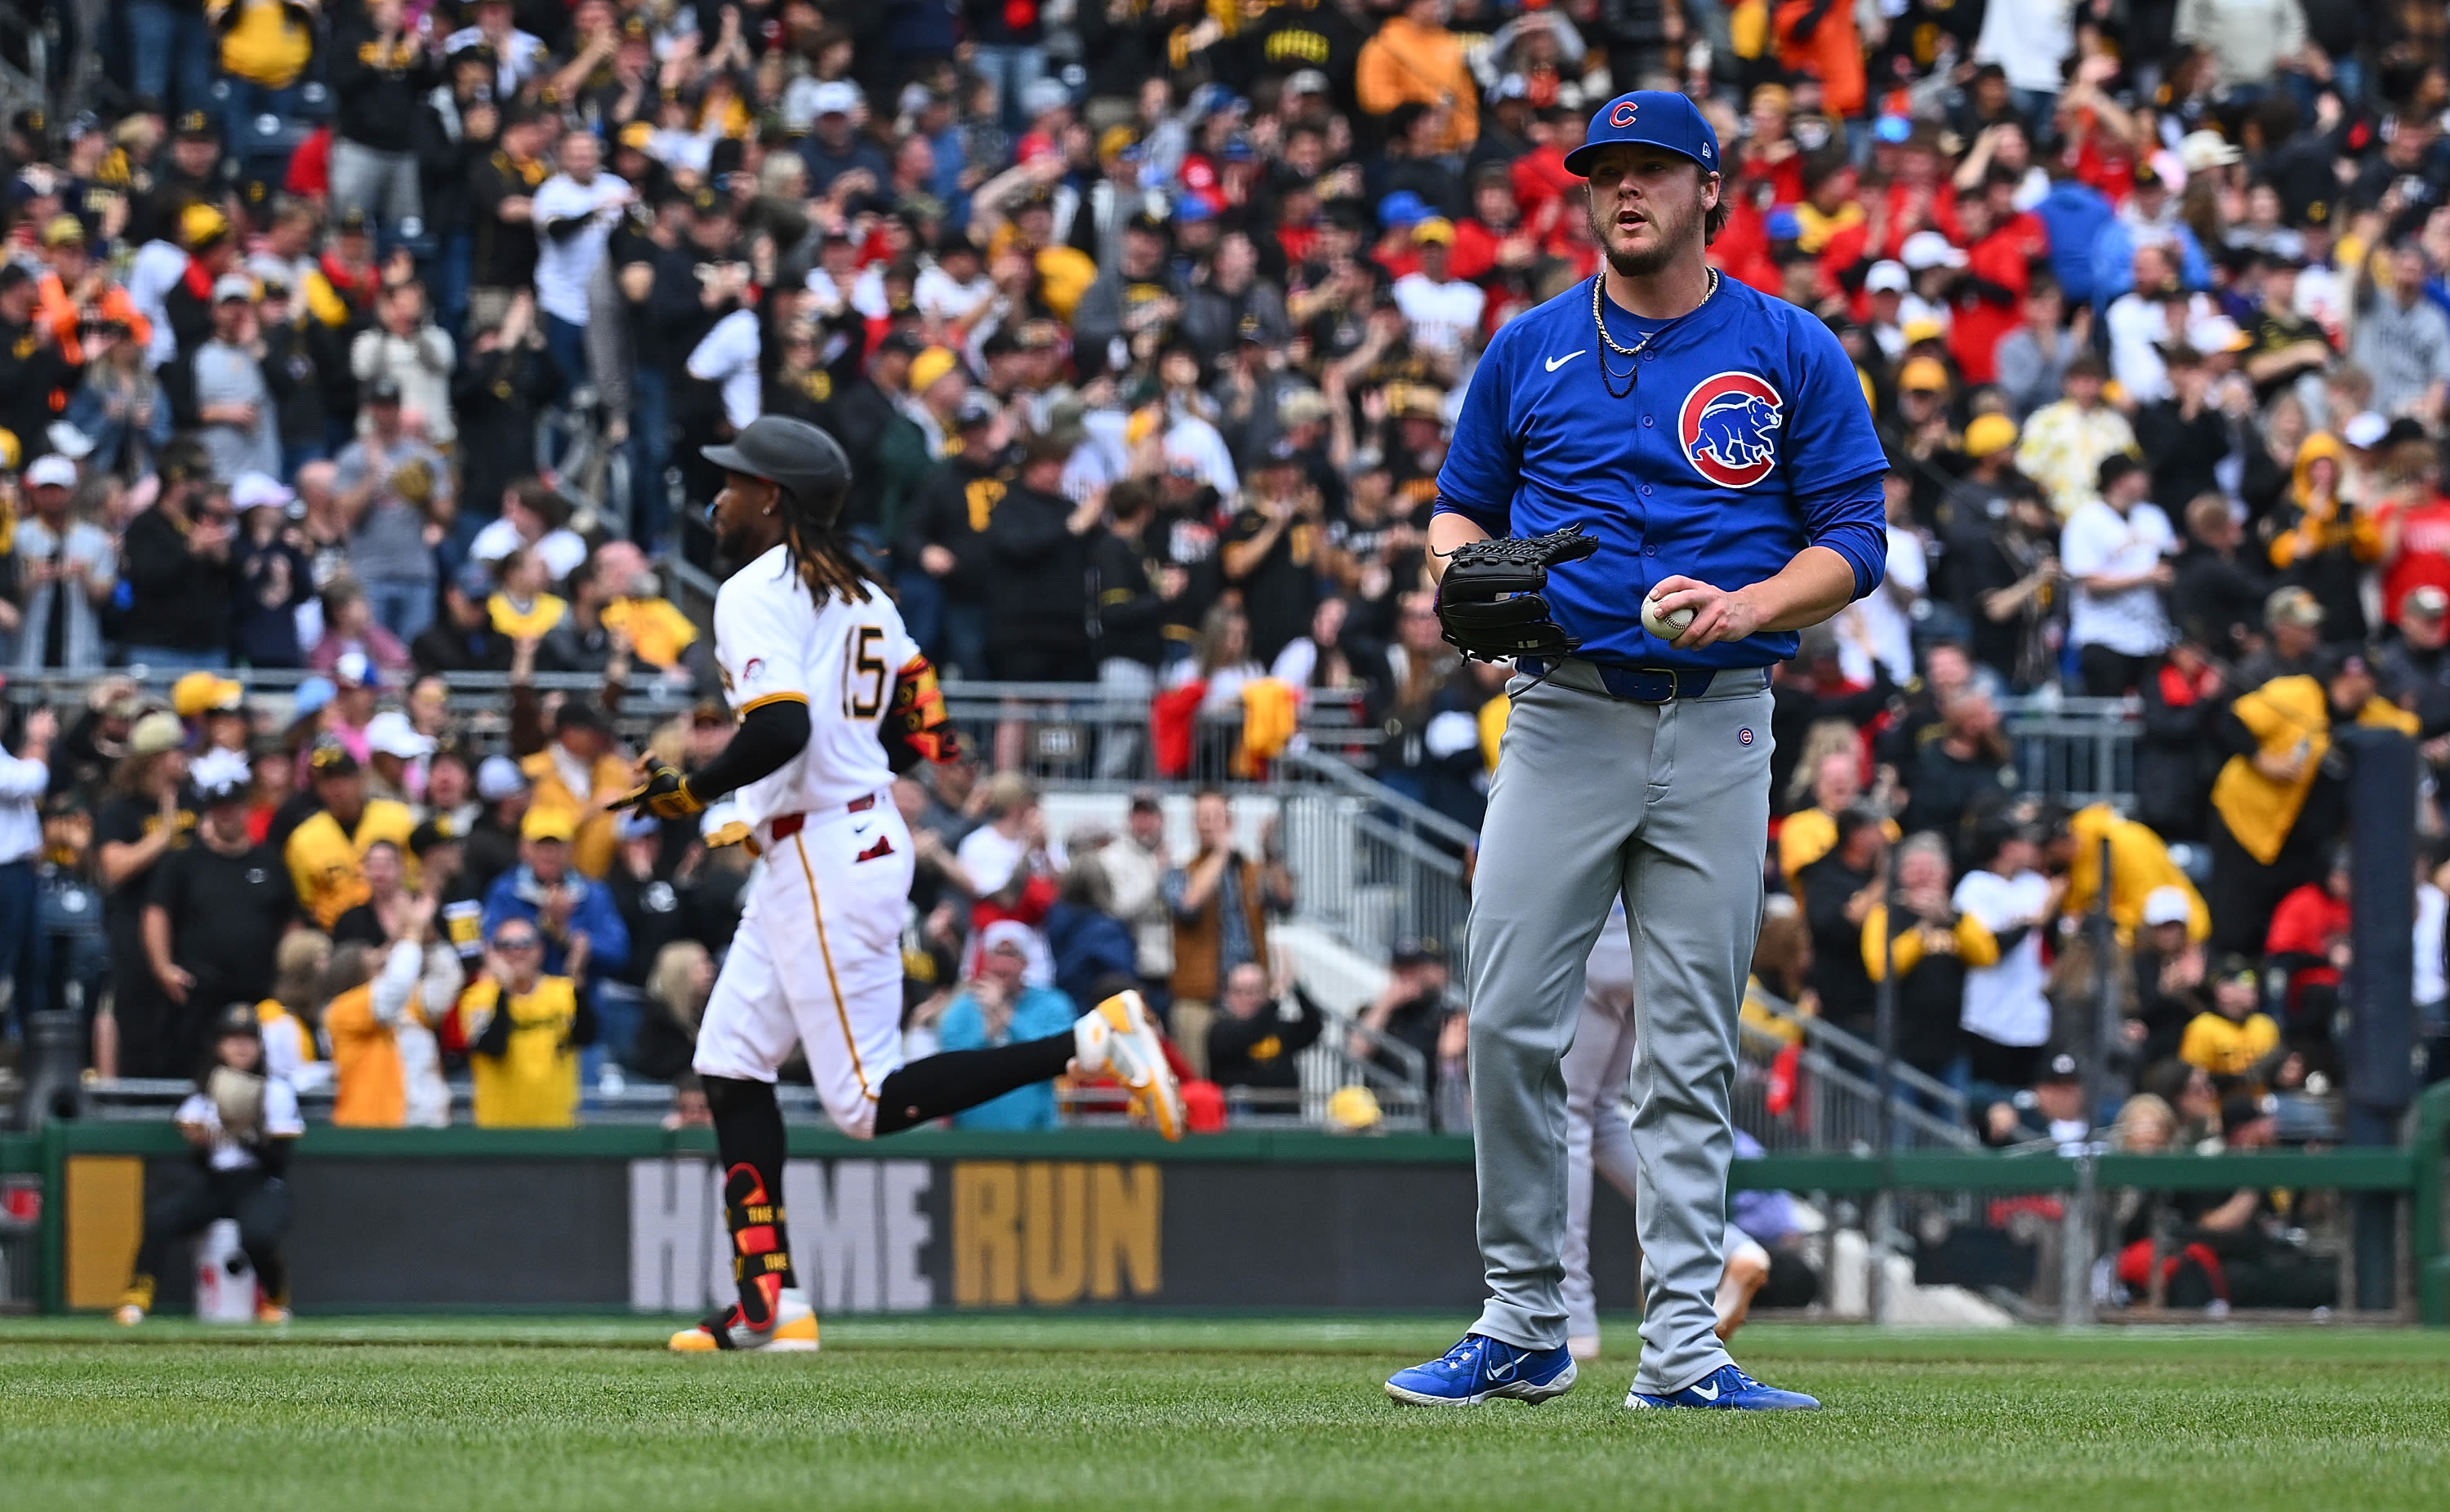 Cubs tie up game against Pirates before going into rain delay in the fifth inning